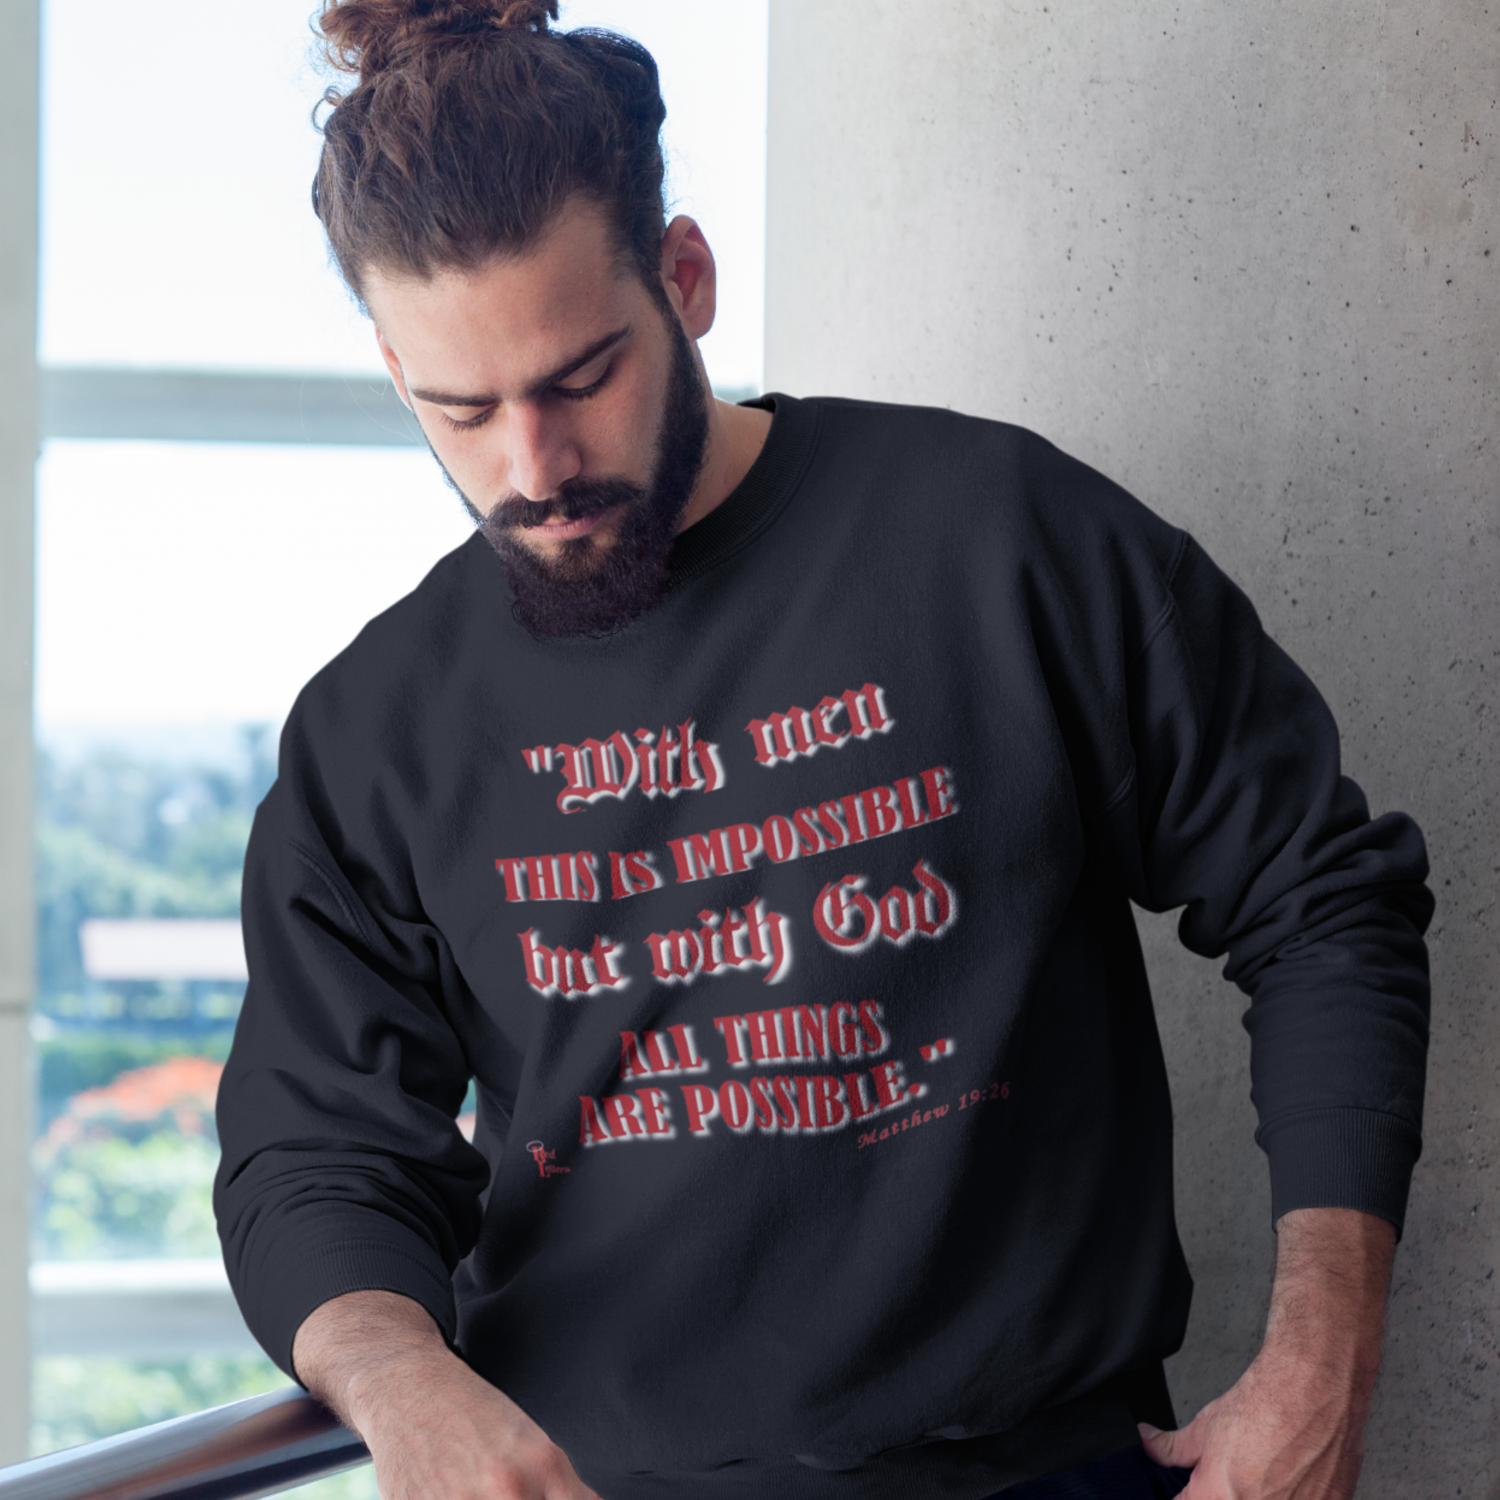 With God All Things Are Possible - Christian Sweatshirt